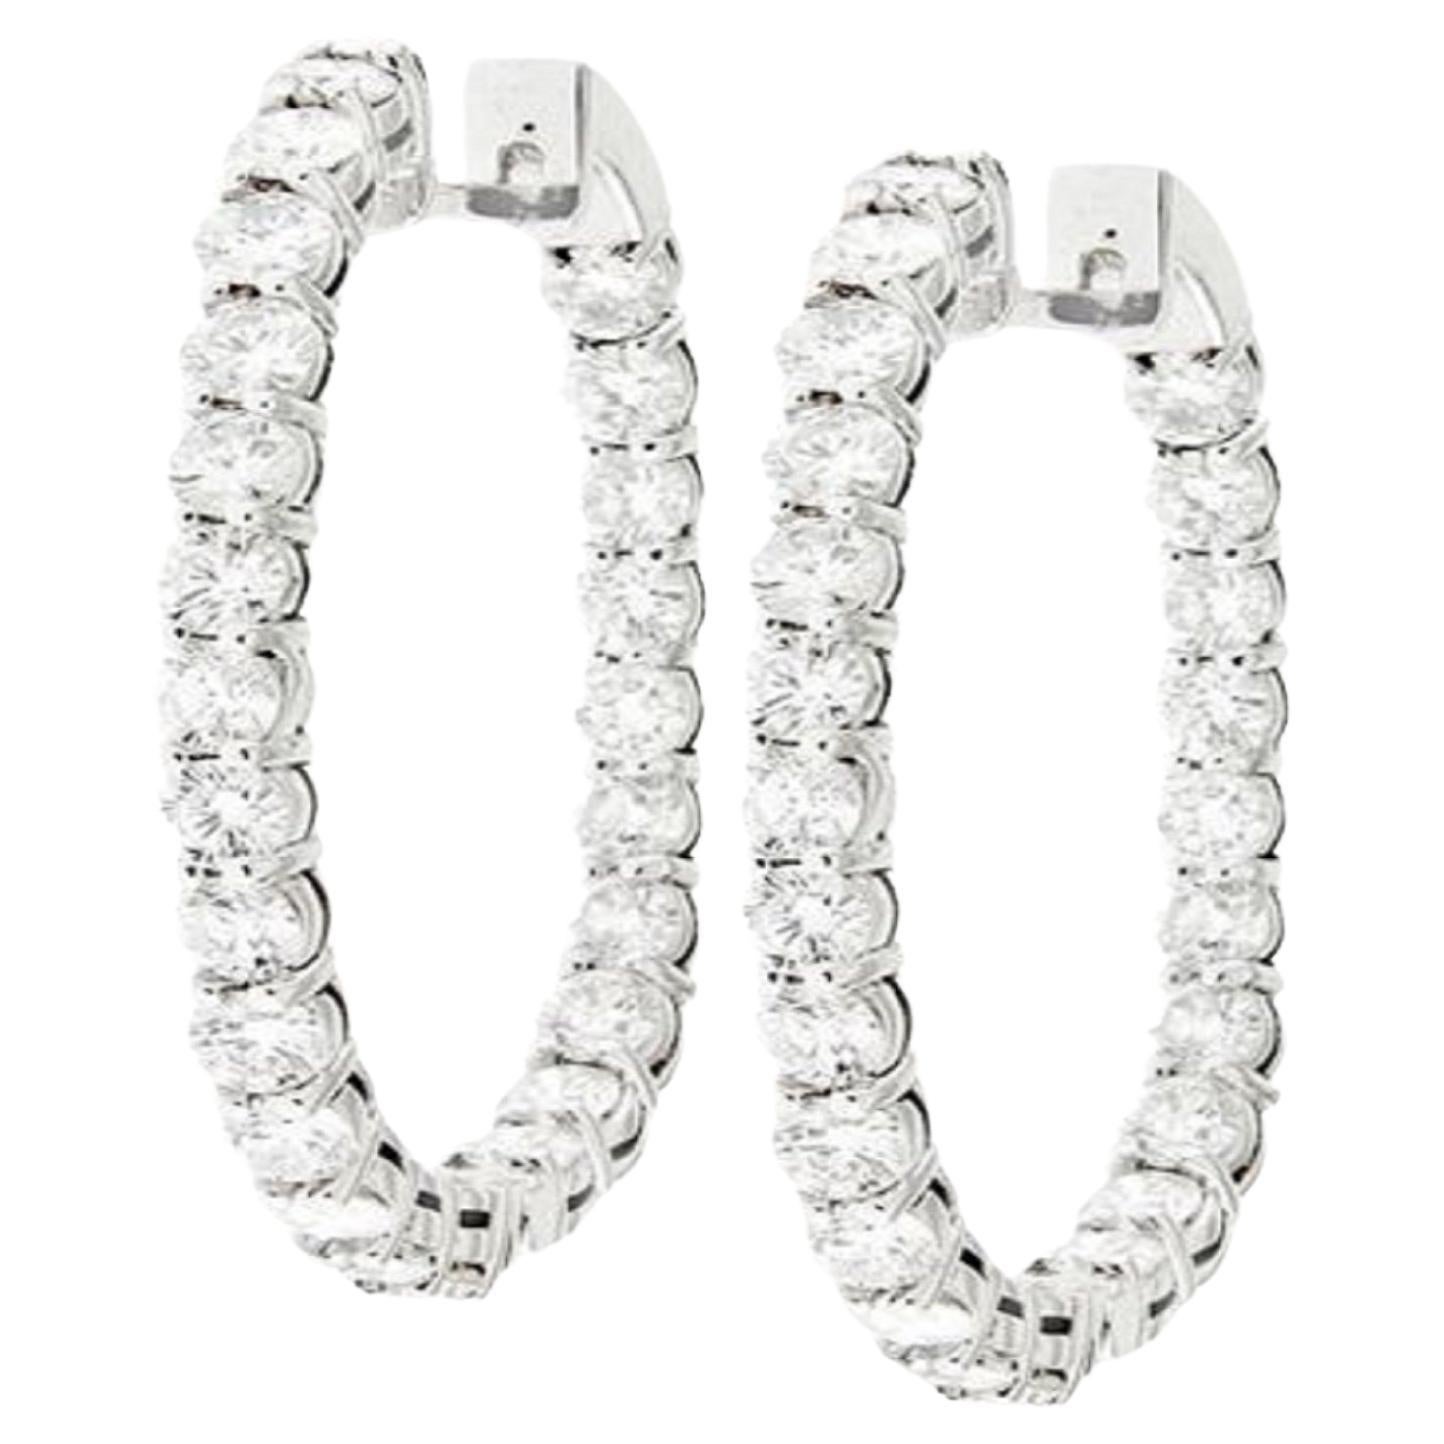 Diana M. 18 kt white gold inside-out hoop earrings adorned with 11.20 cts tw of 